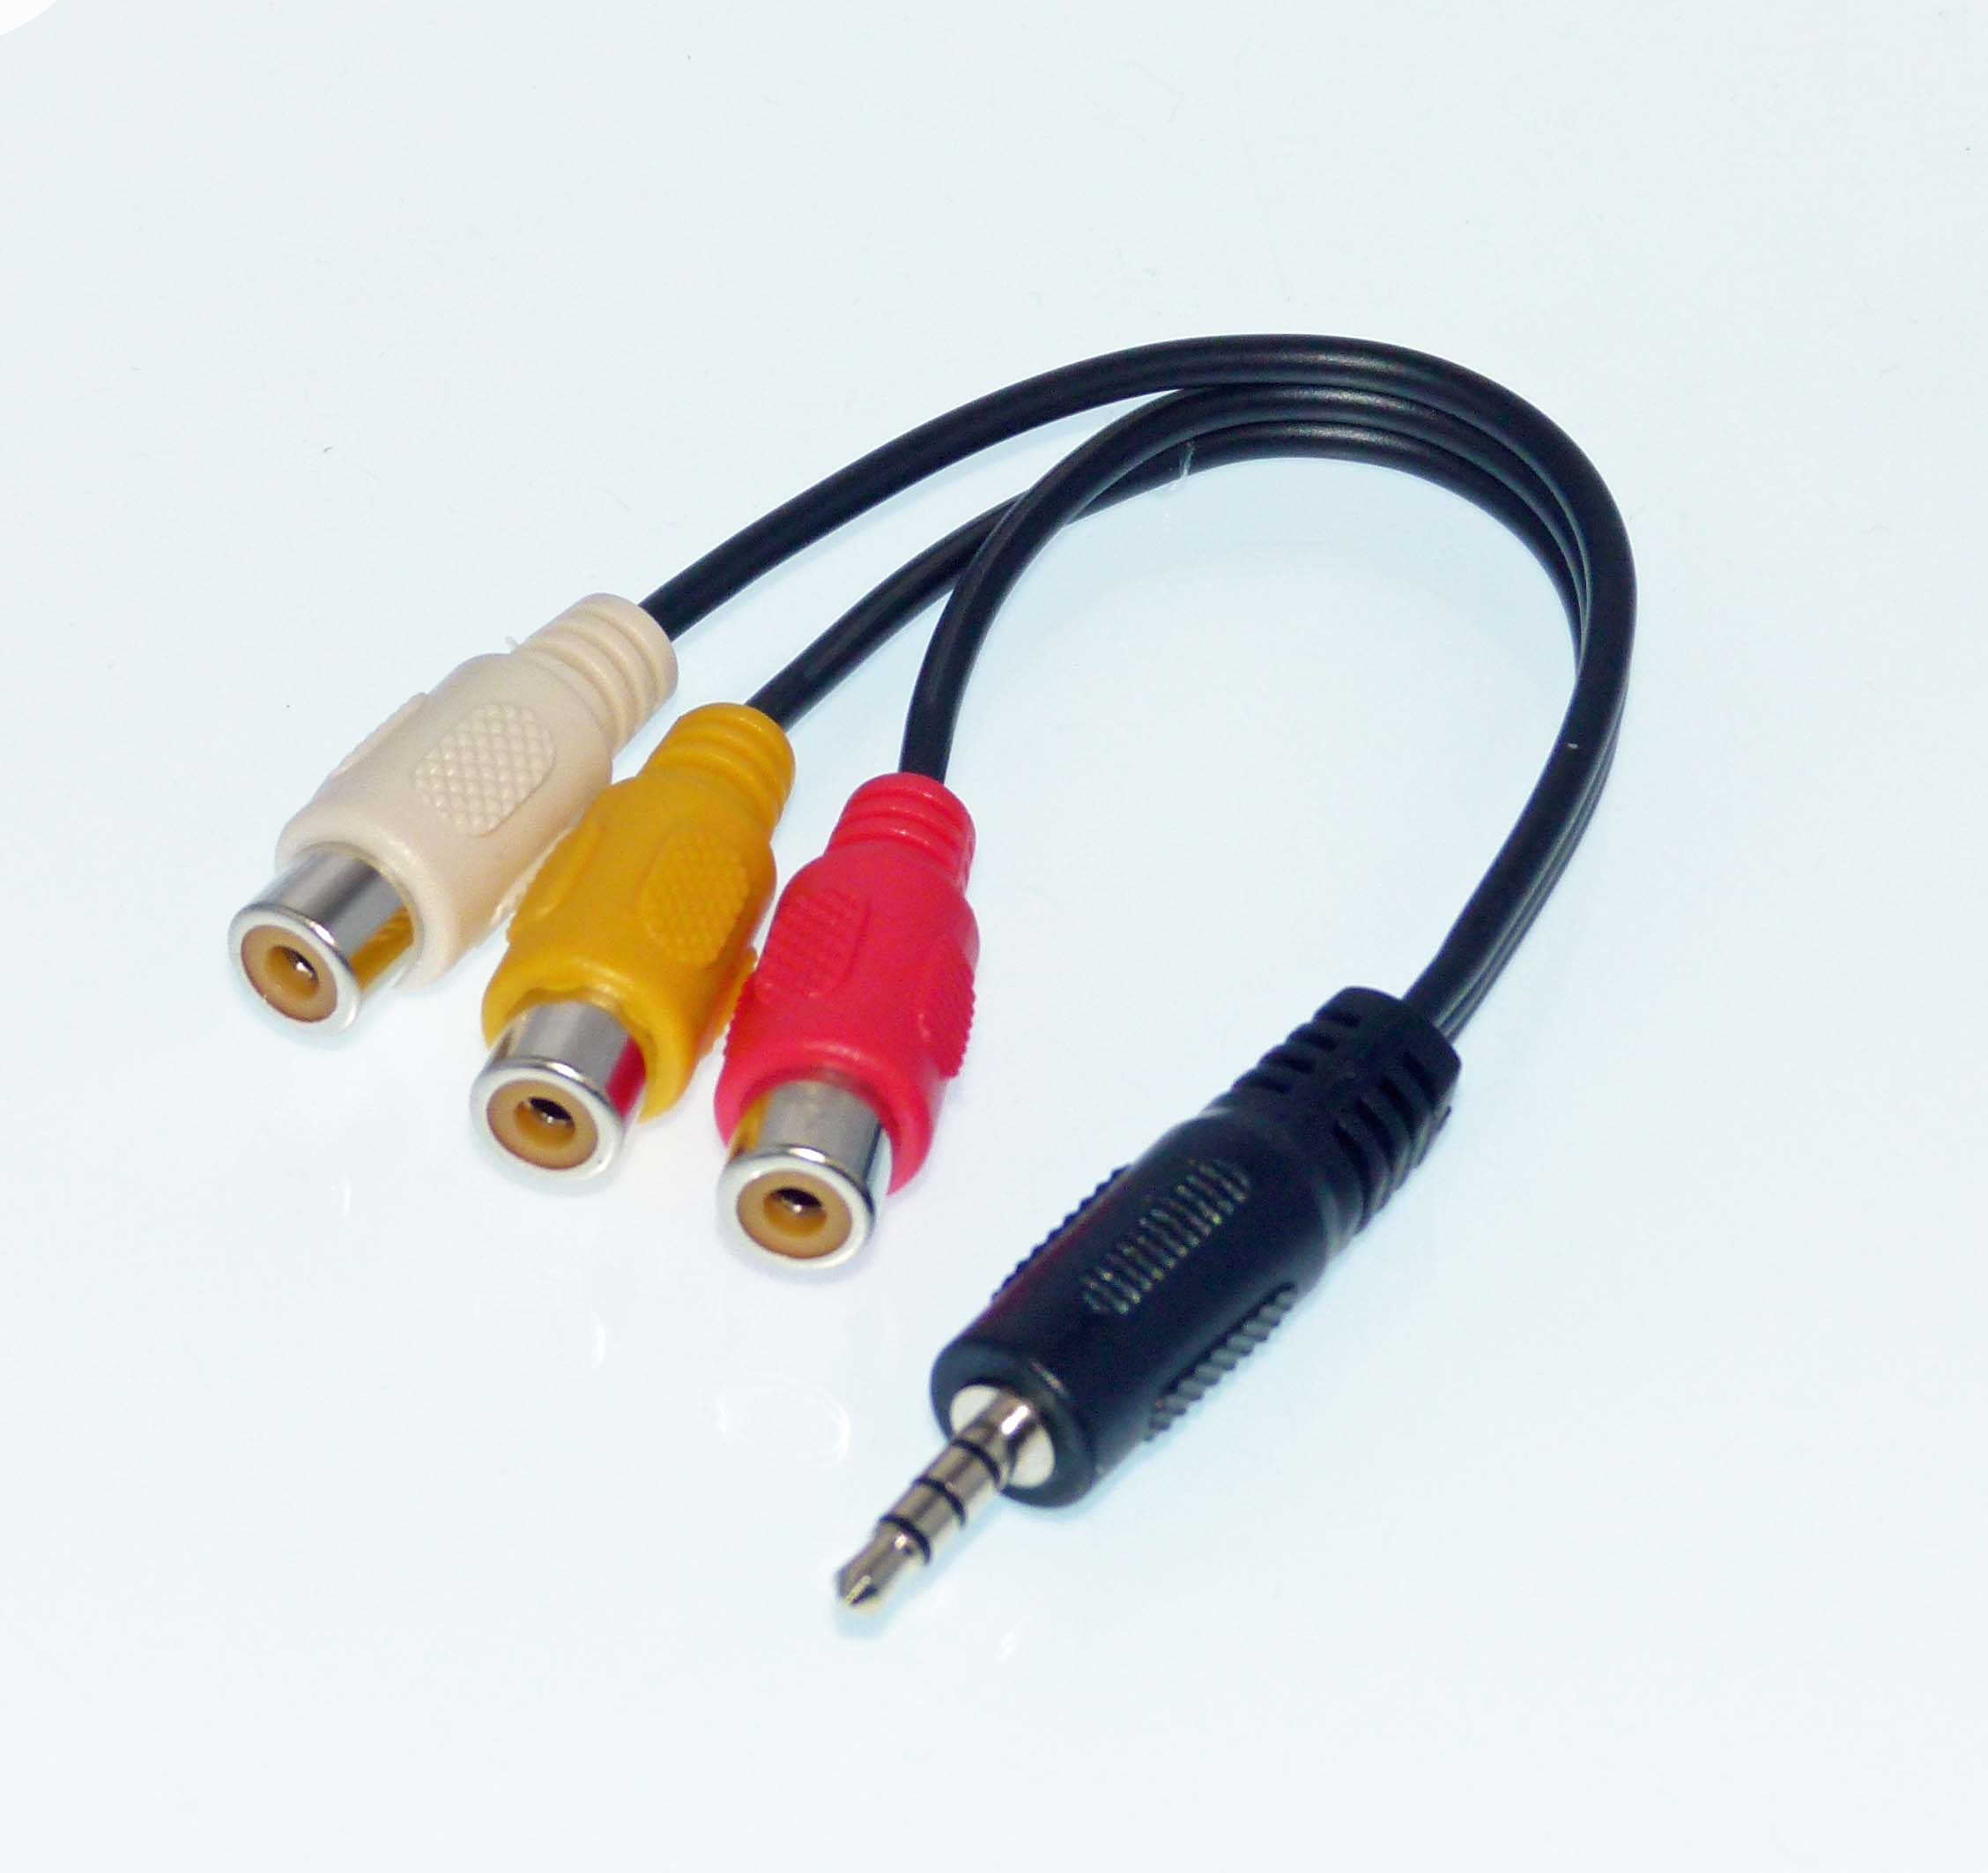 Philips USA Composite Video Cable With Gold Tips 6